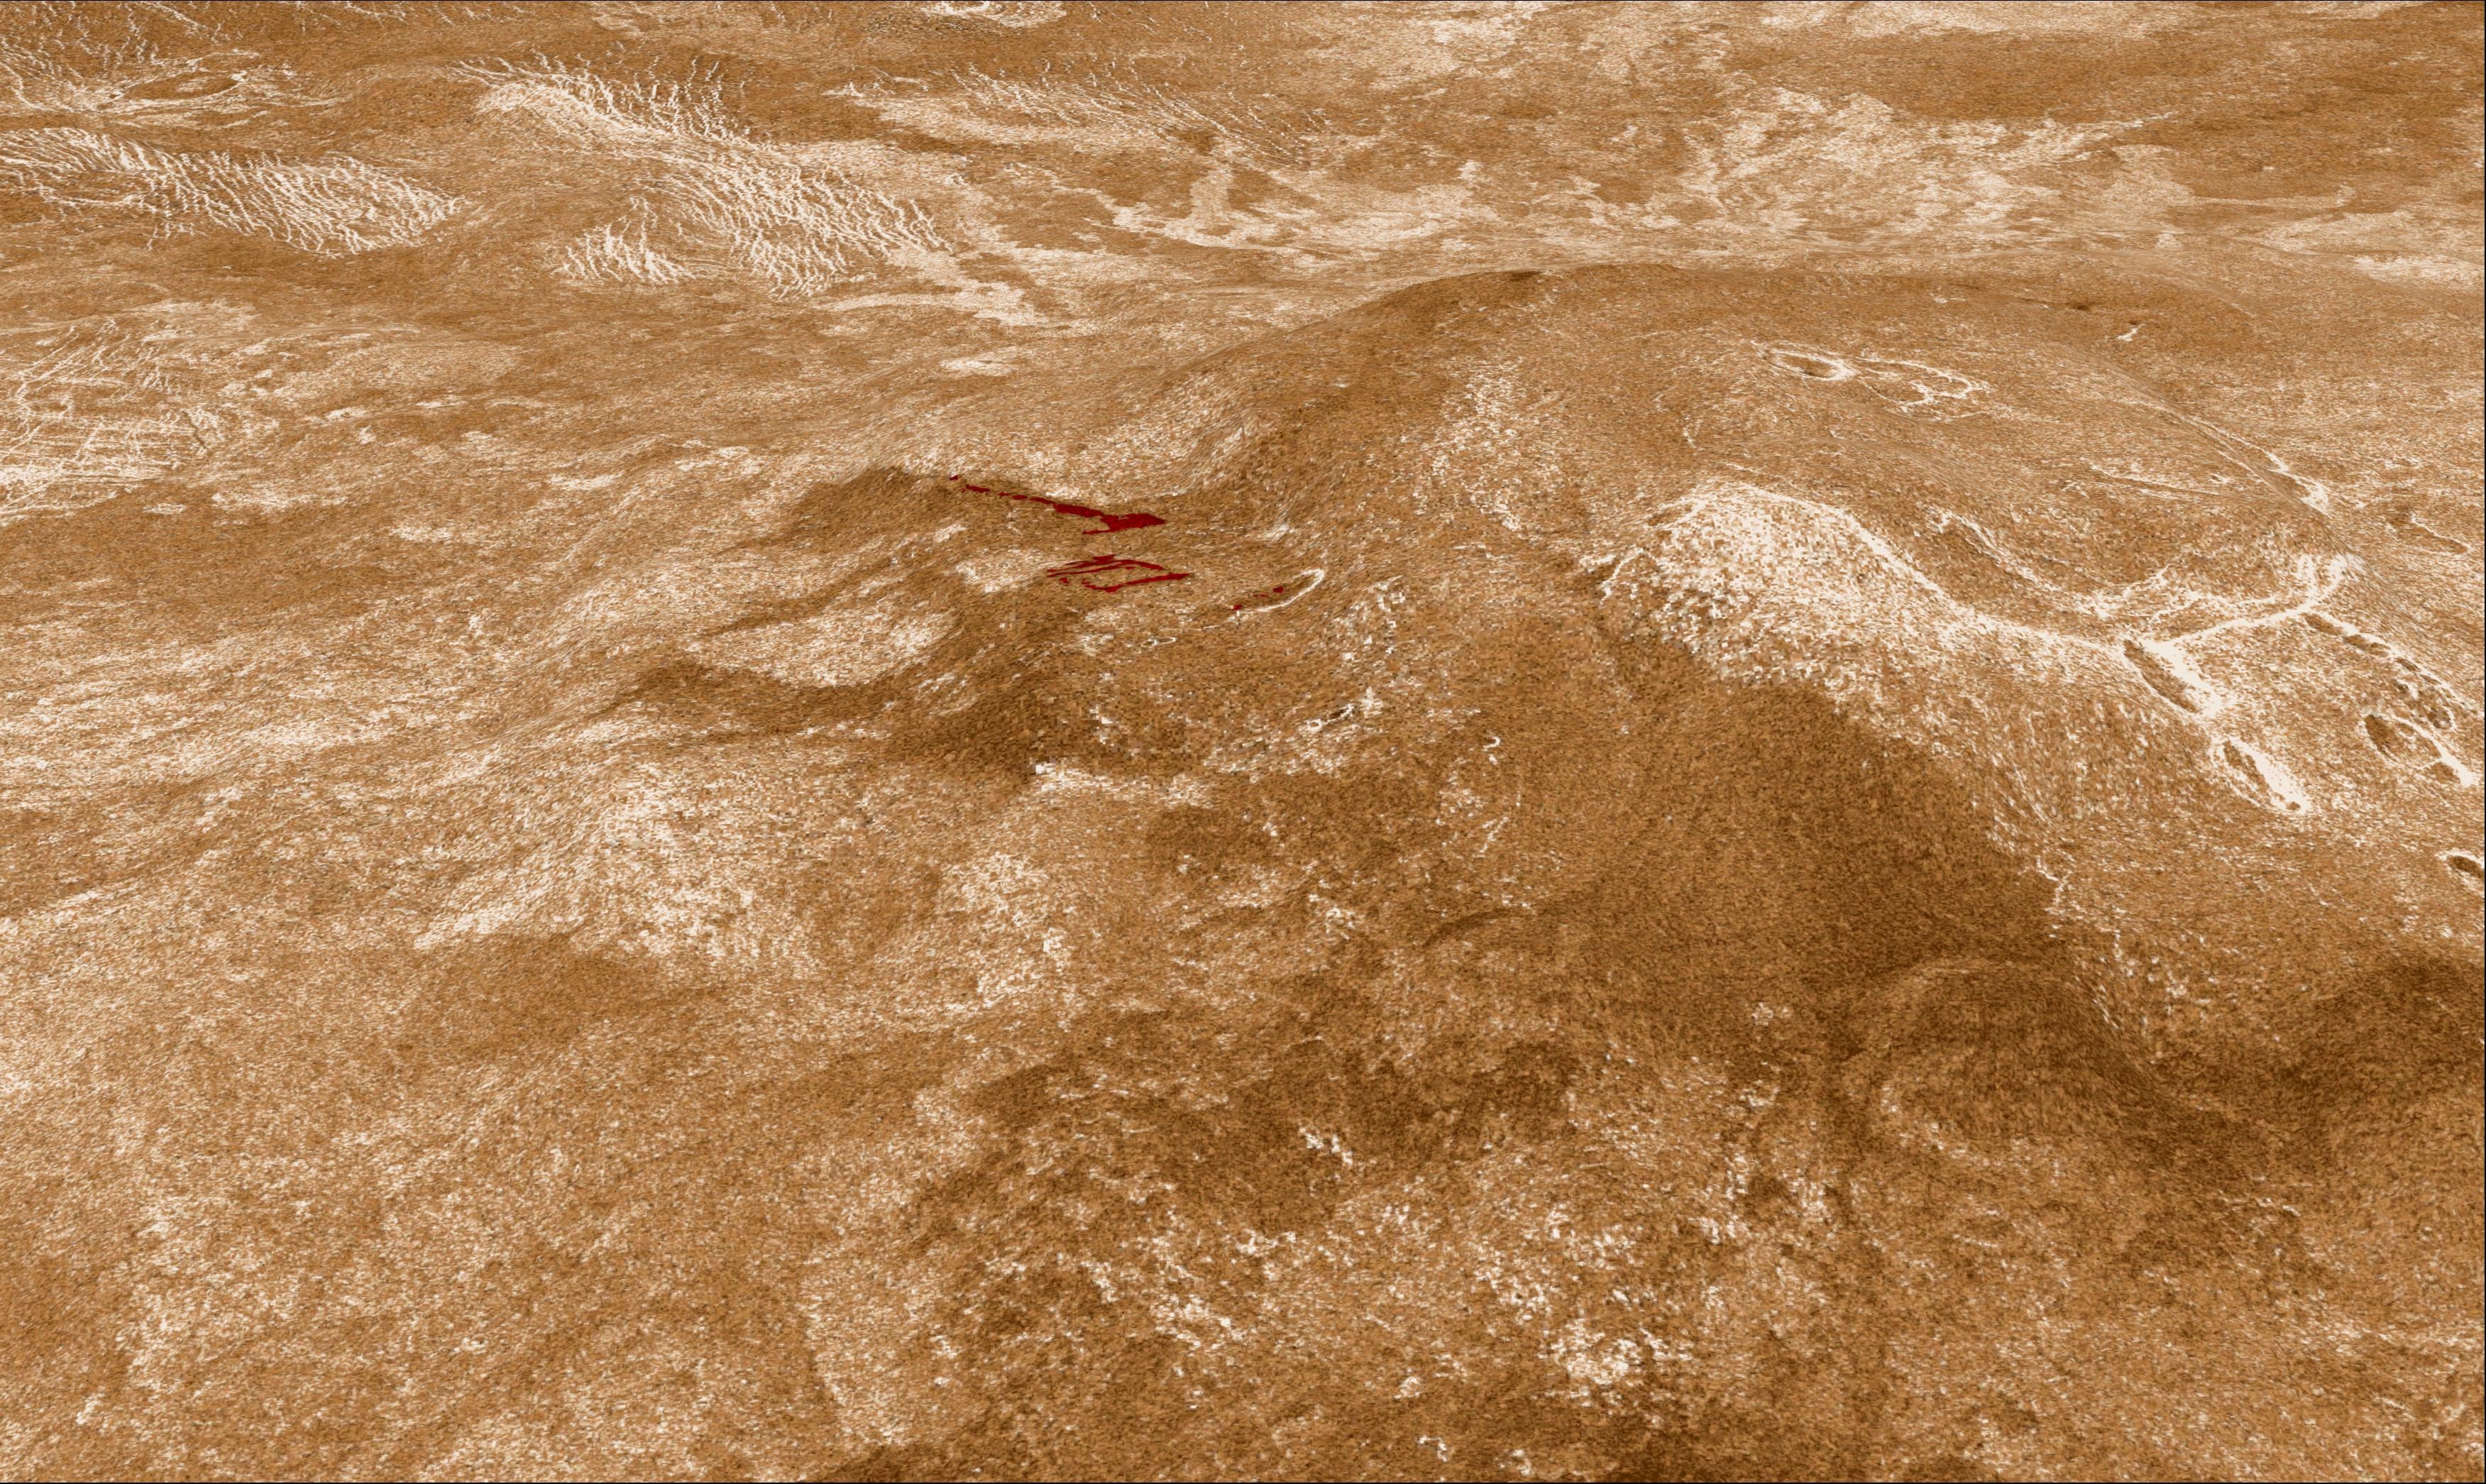 This image showcases the Sif Mons area with the active volcanic region highlighted in red.

Credit: IRSPS - Università d'Annunzio: